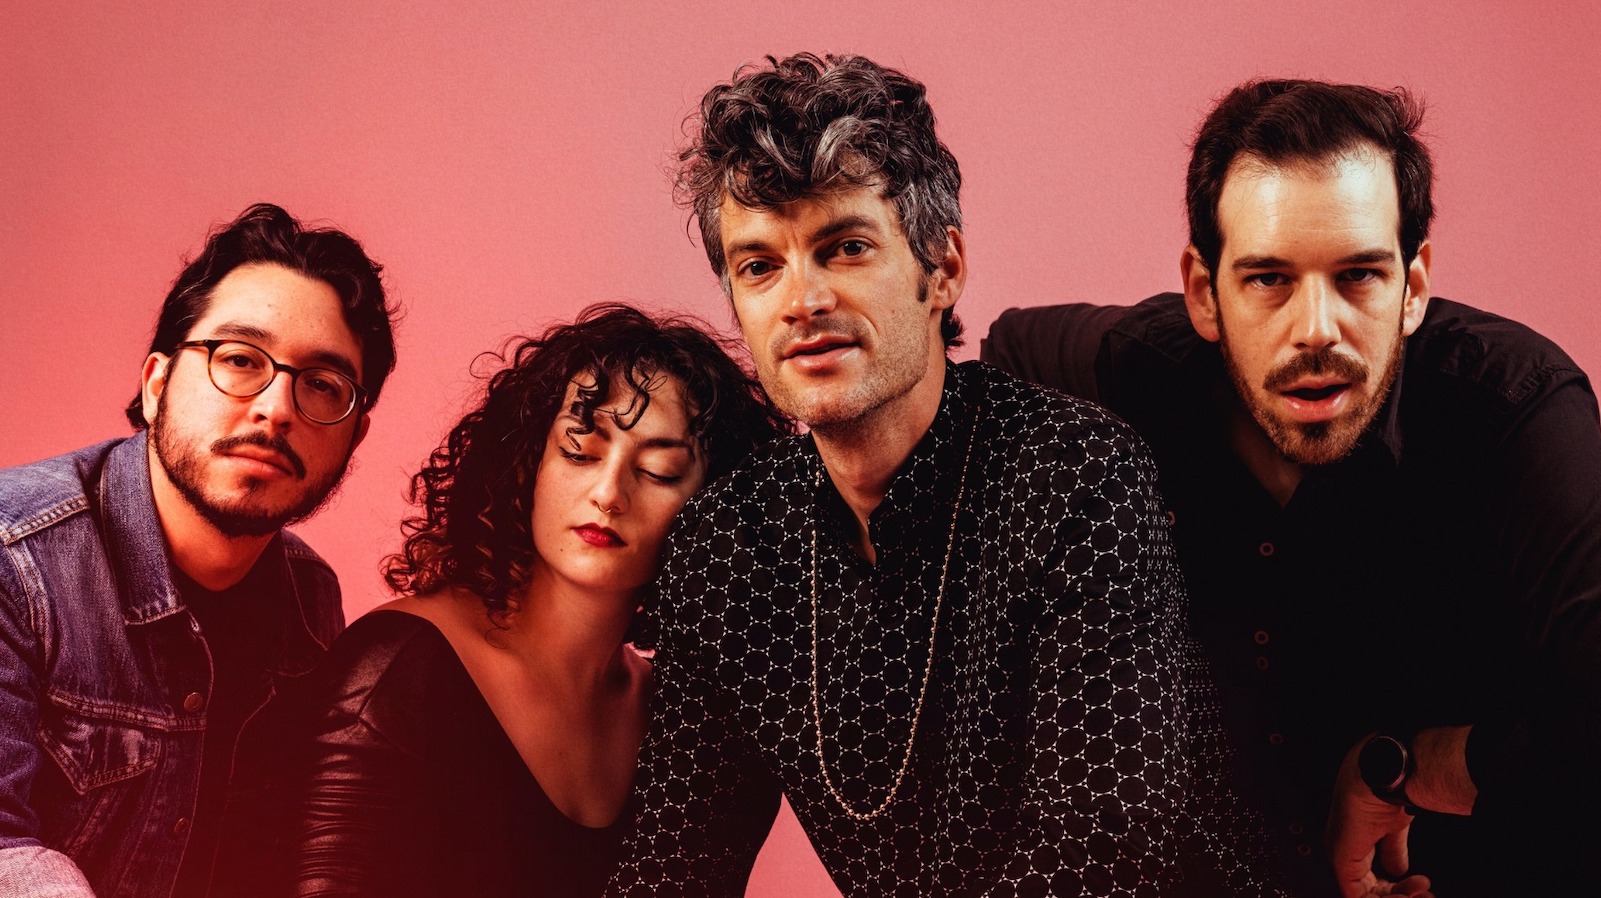 A group photo of the band Billy Wylder. The image features four members against a pink background. On the left, a man with short dark hair, glasses, and a beard wears a denim jacket. Next to him, a woman with curly dark hair and a red lipstick has her eyes closed and wears a black top. The third member, with wavy, graying hair and a patterned black shirt, looks directly at the camera with a slight smile. The fourth member, on the far right, has short dark hair and a beard, wearing a black shirt and looking intently at the camera.